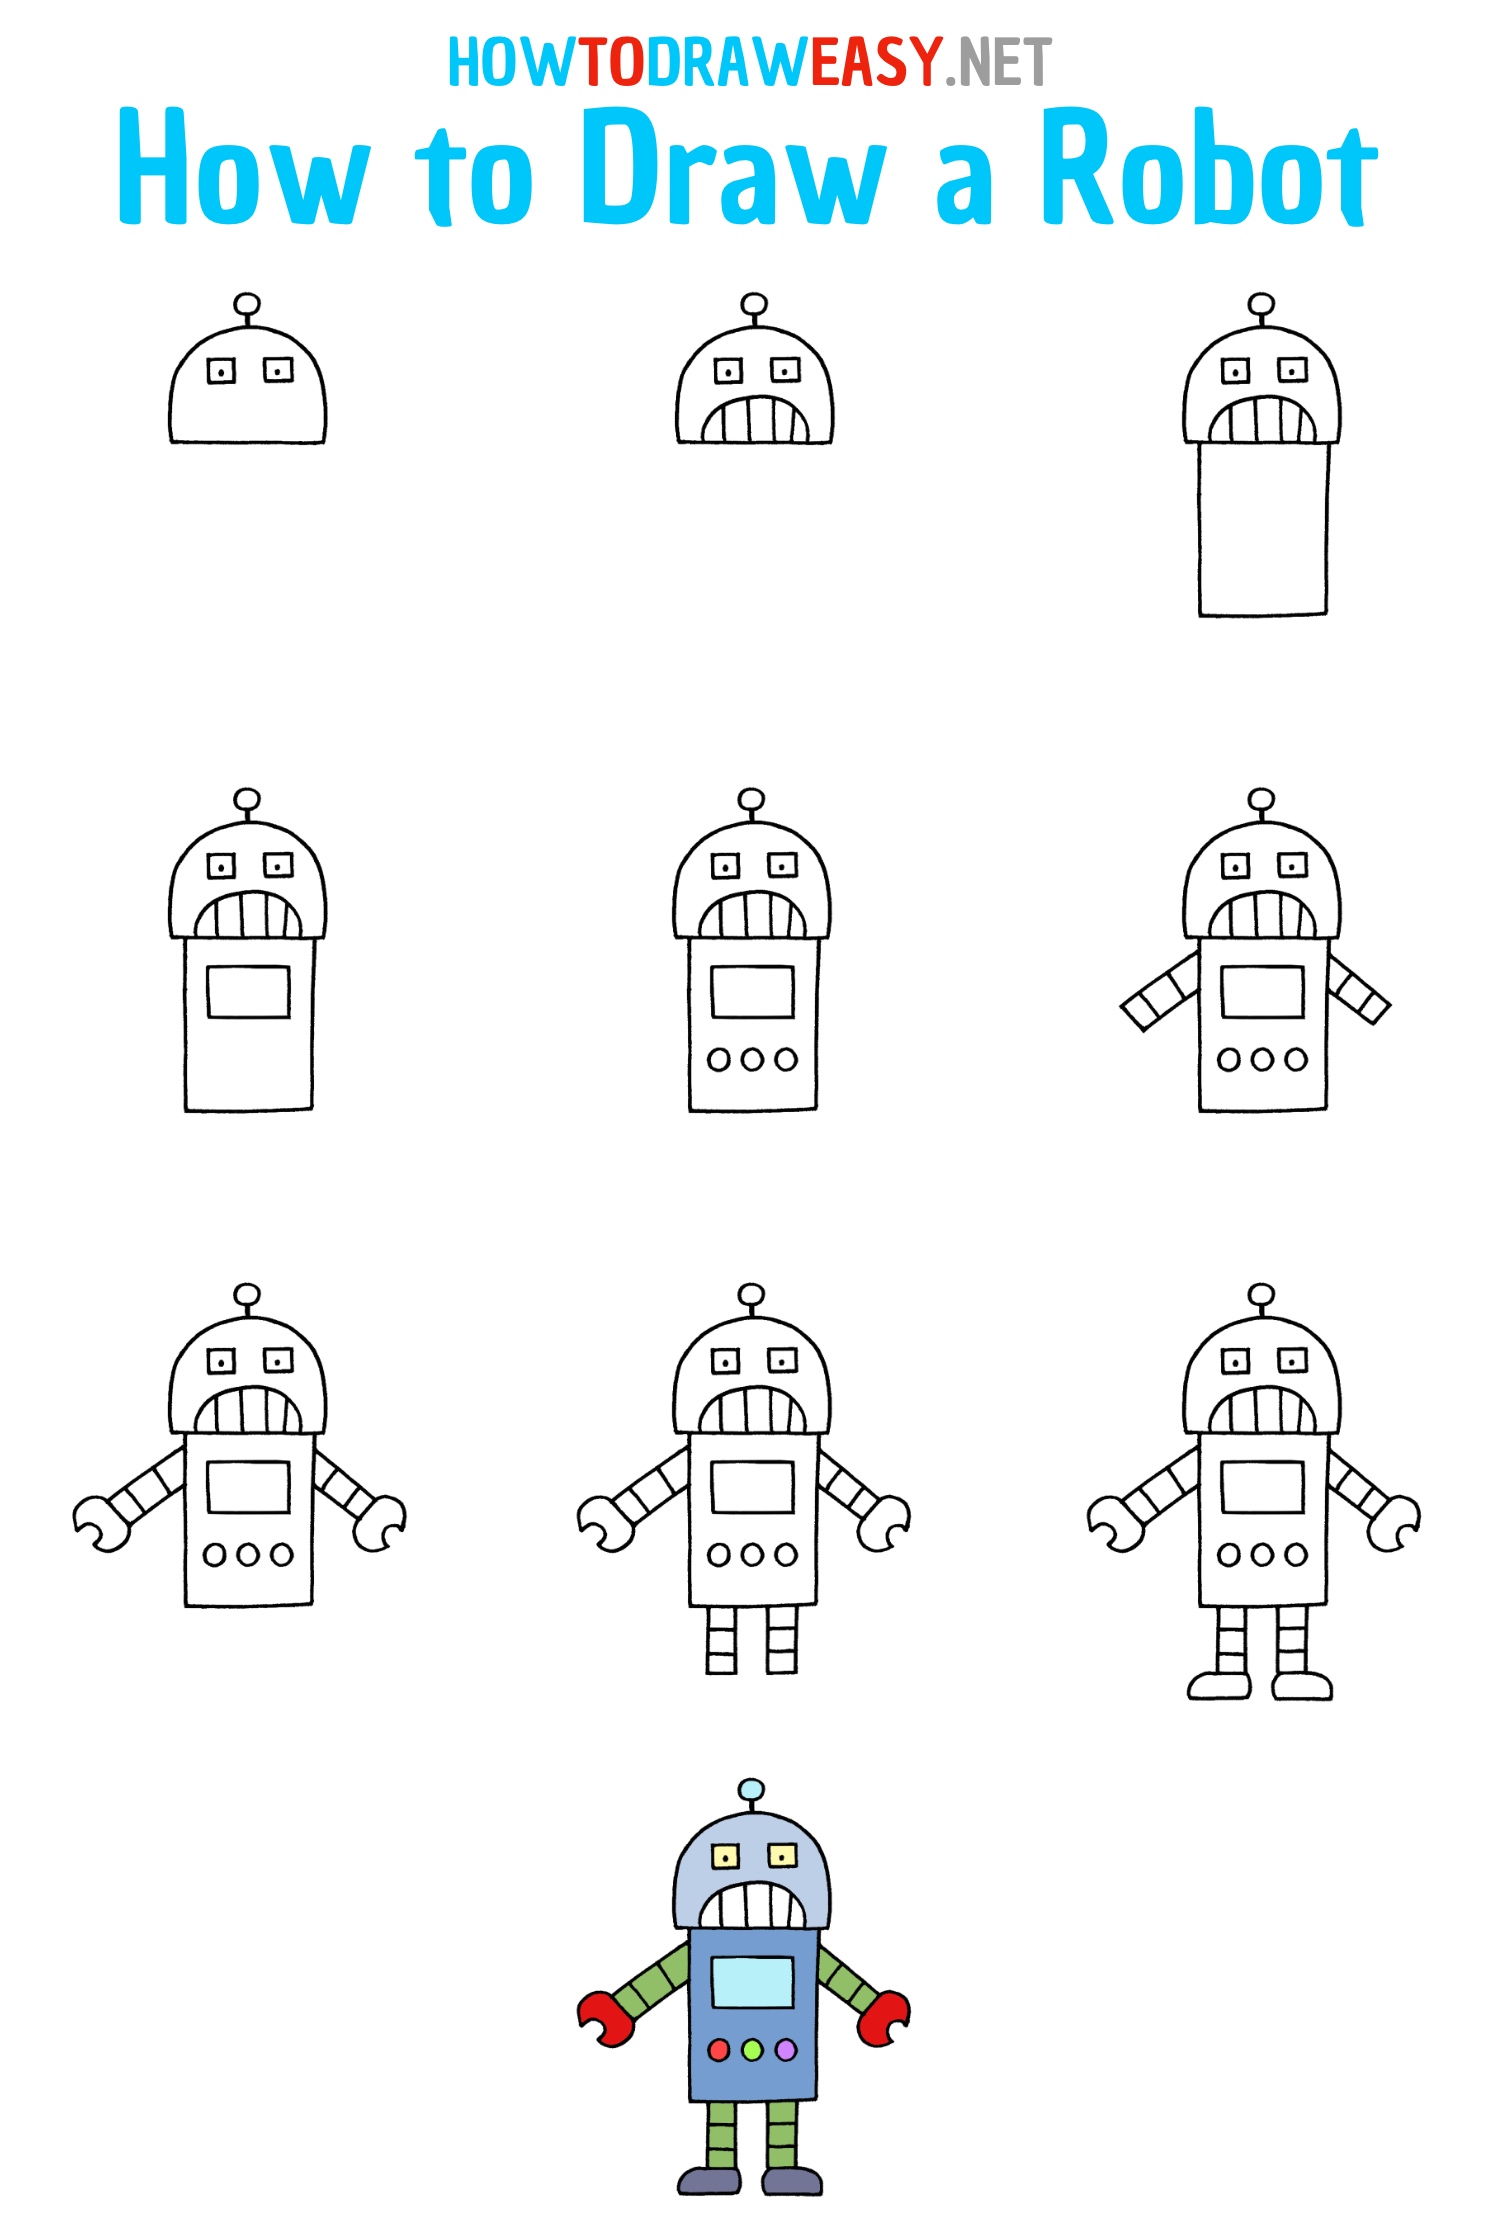 How to Draw a Robot Step by Step